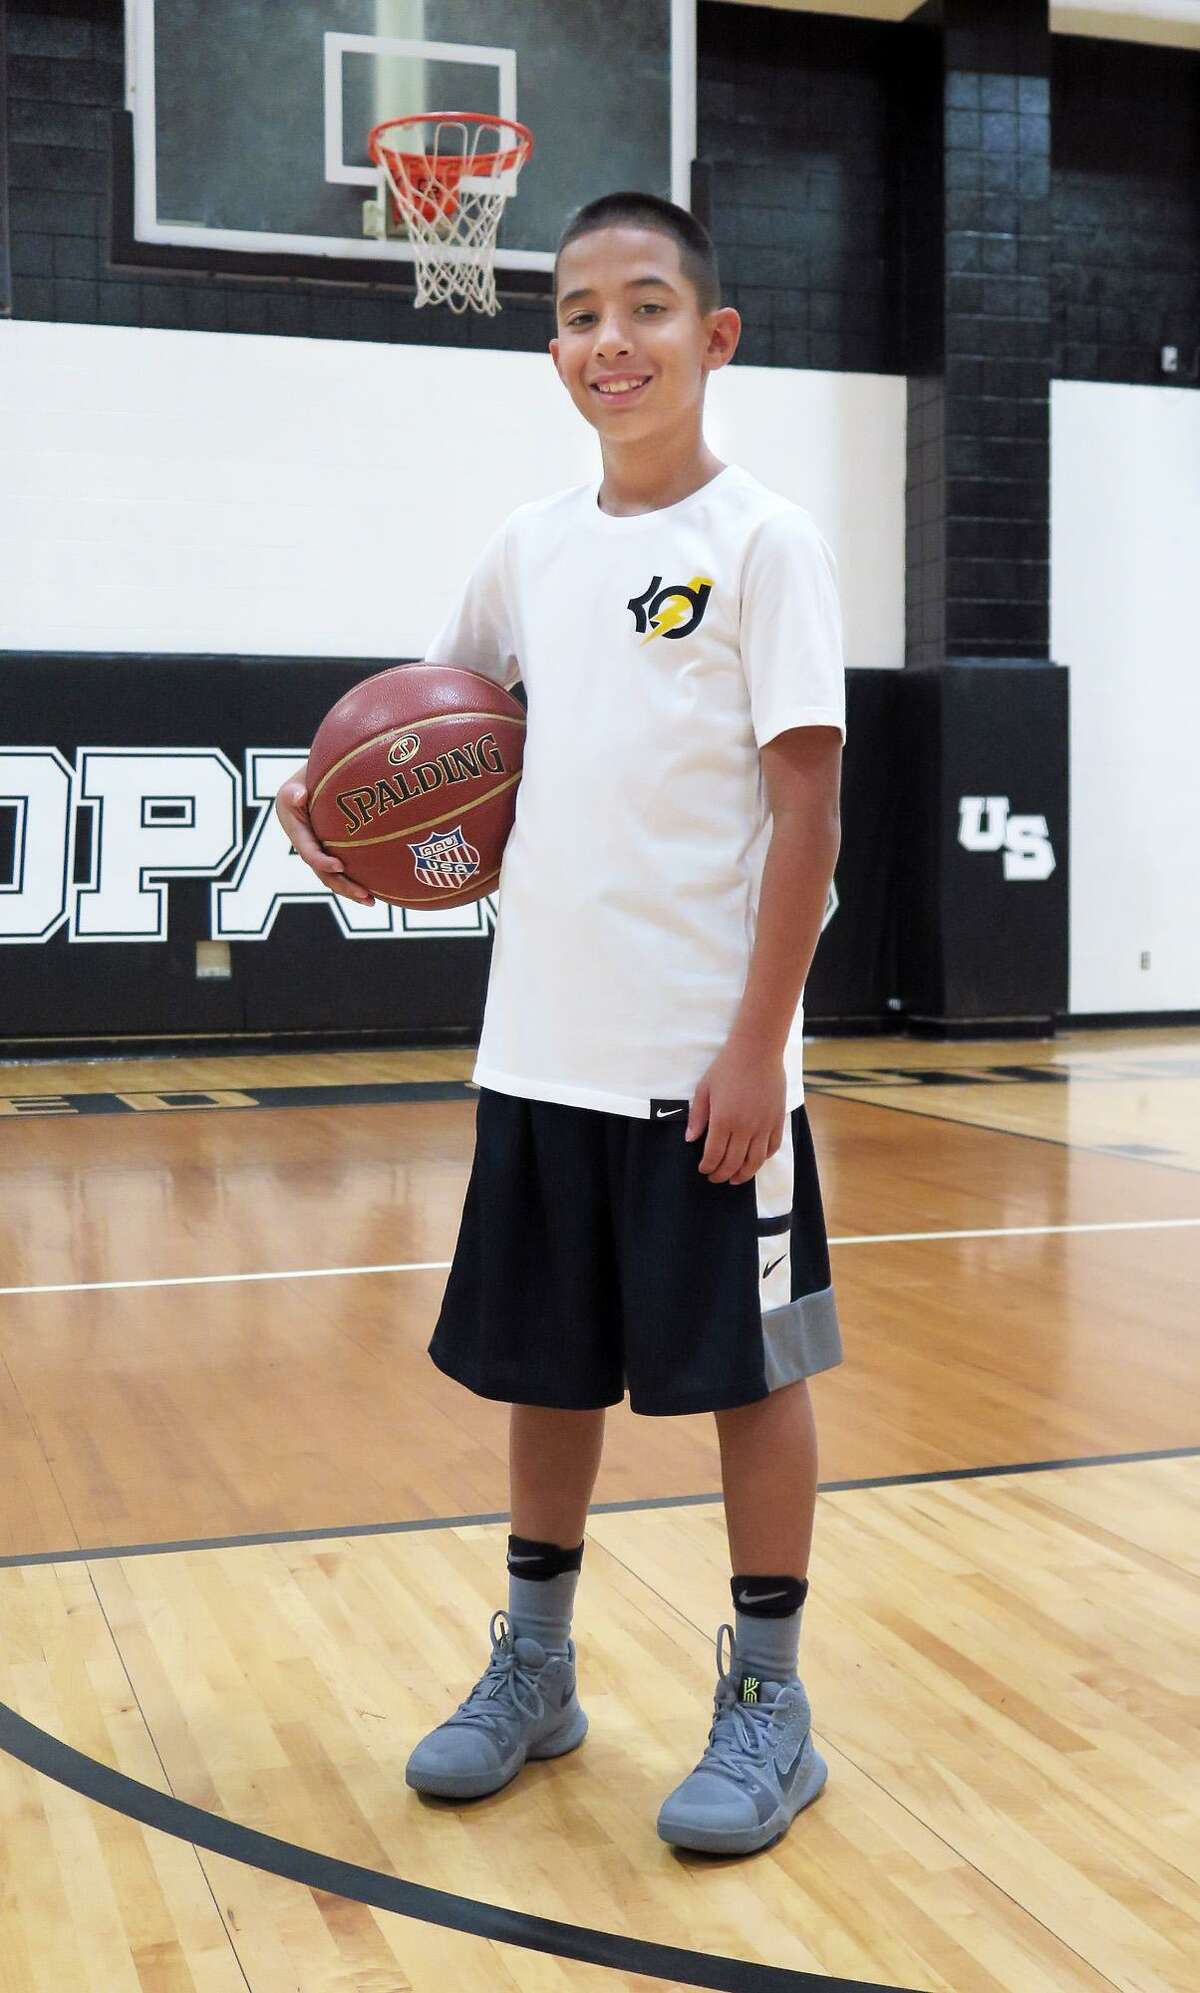 H.B. Zachry Elementary student, D J Robles prepares for his basketball travel team's upcoming tournament in Las Vegas, Nevada.